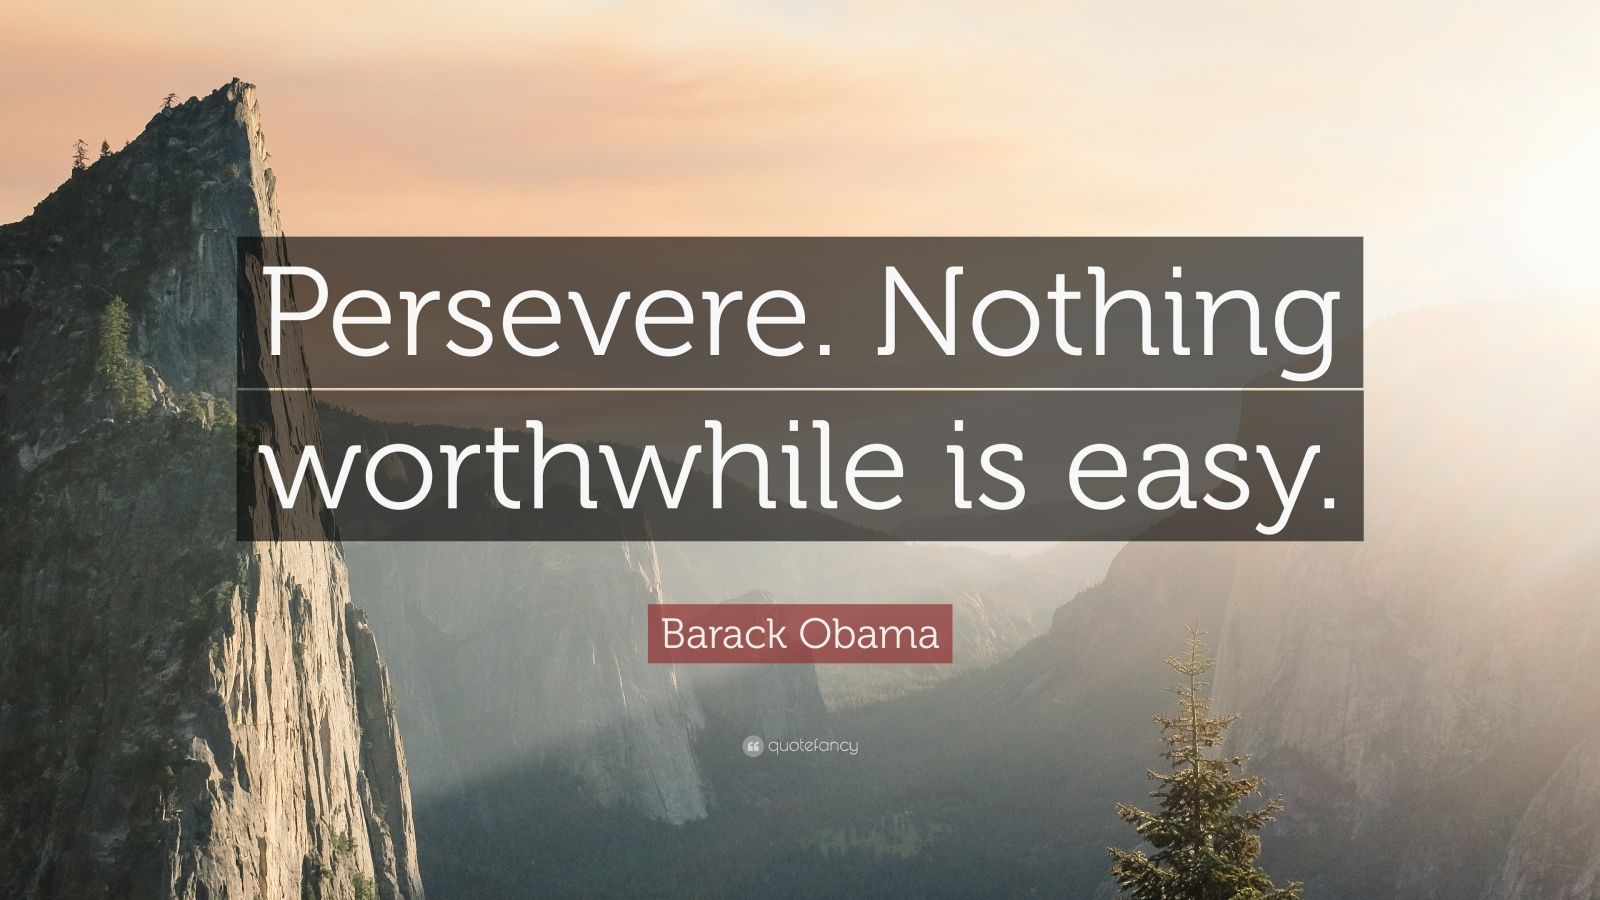 Barack Obama Quote: “Persevere. Nothing worthwhile is easy.”